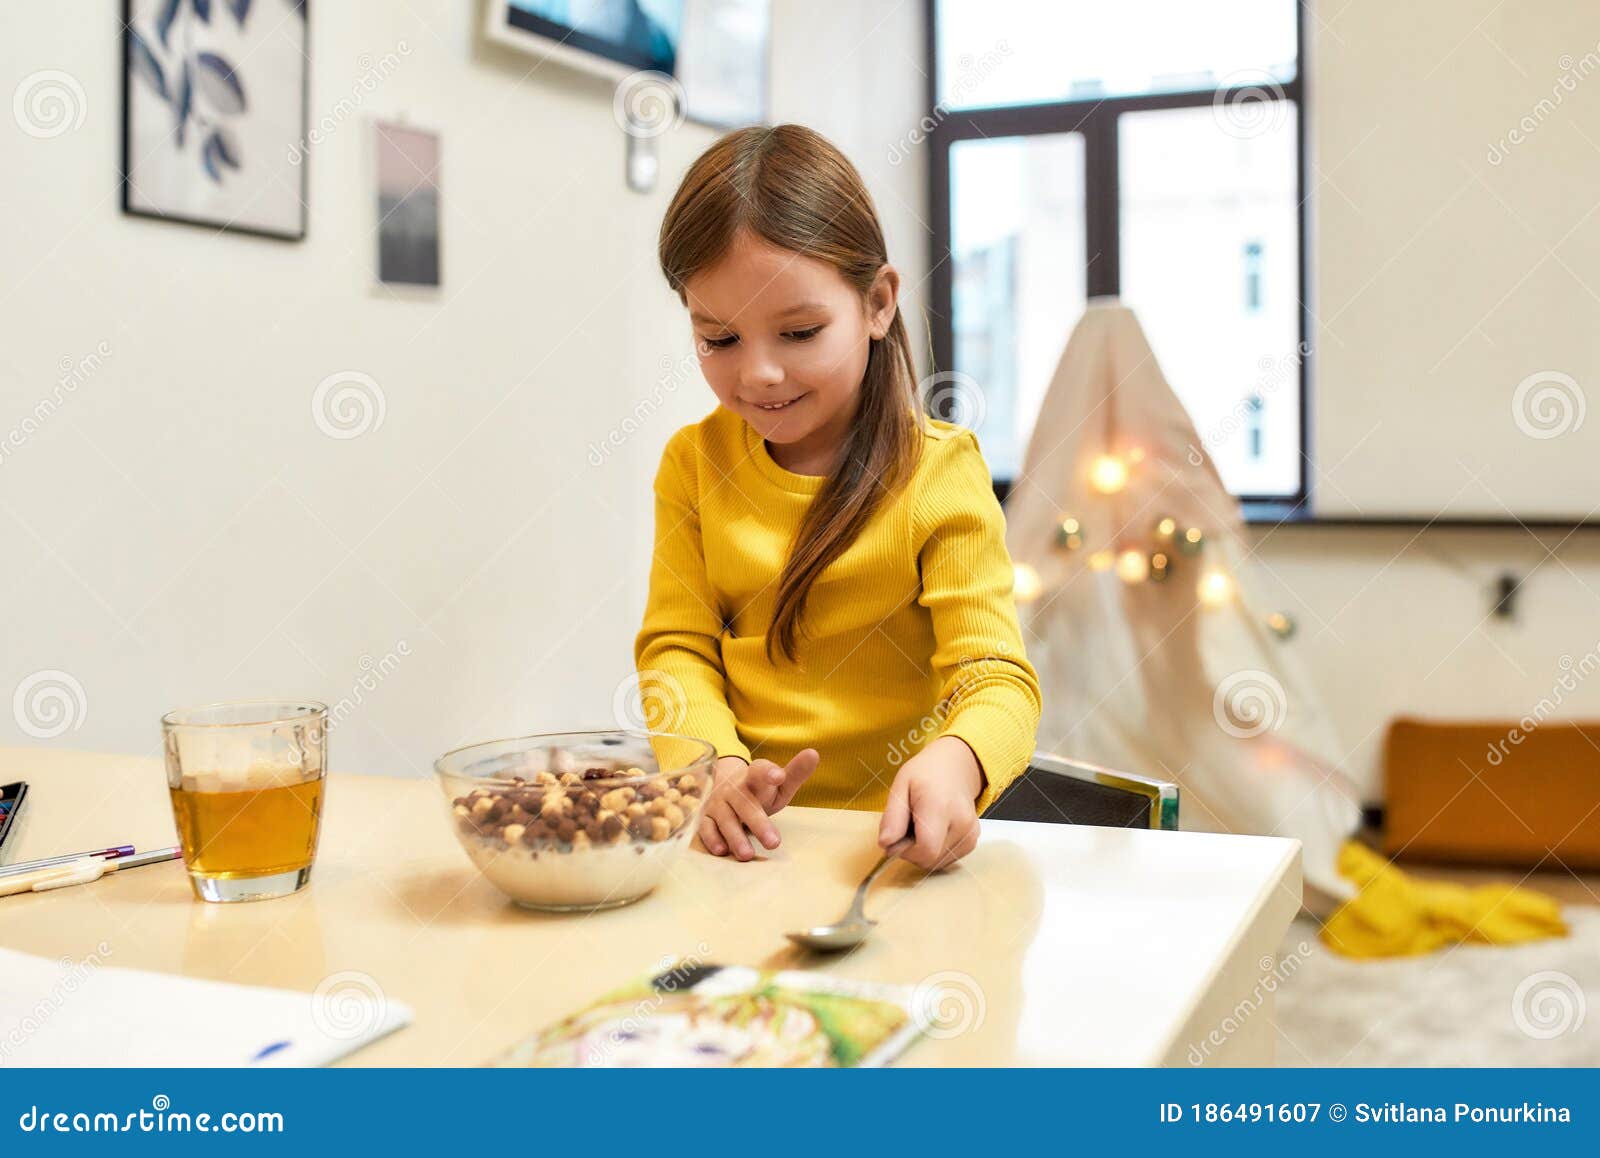 The Breakfast Of Champions Caucasian Cute Little Girl Going To Eat Cereal Balls With Milk For Her Breakfast Or Lunch Stock Image Image Of Juice Lifestyle